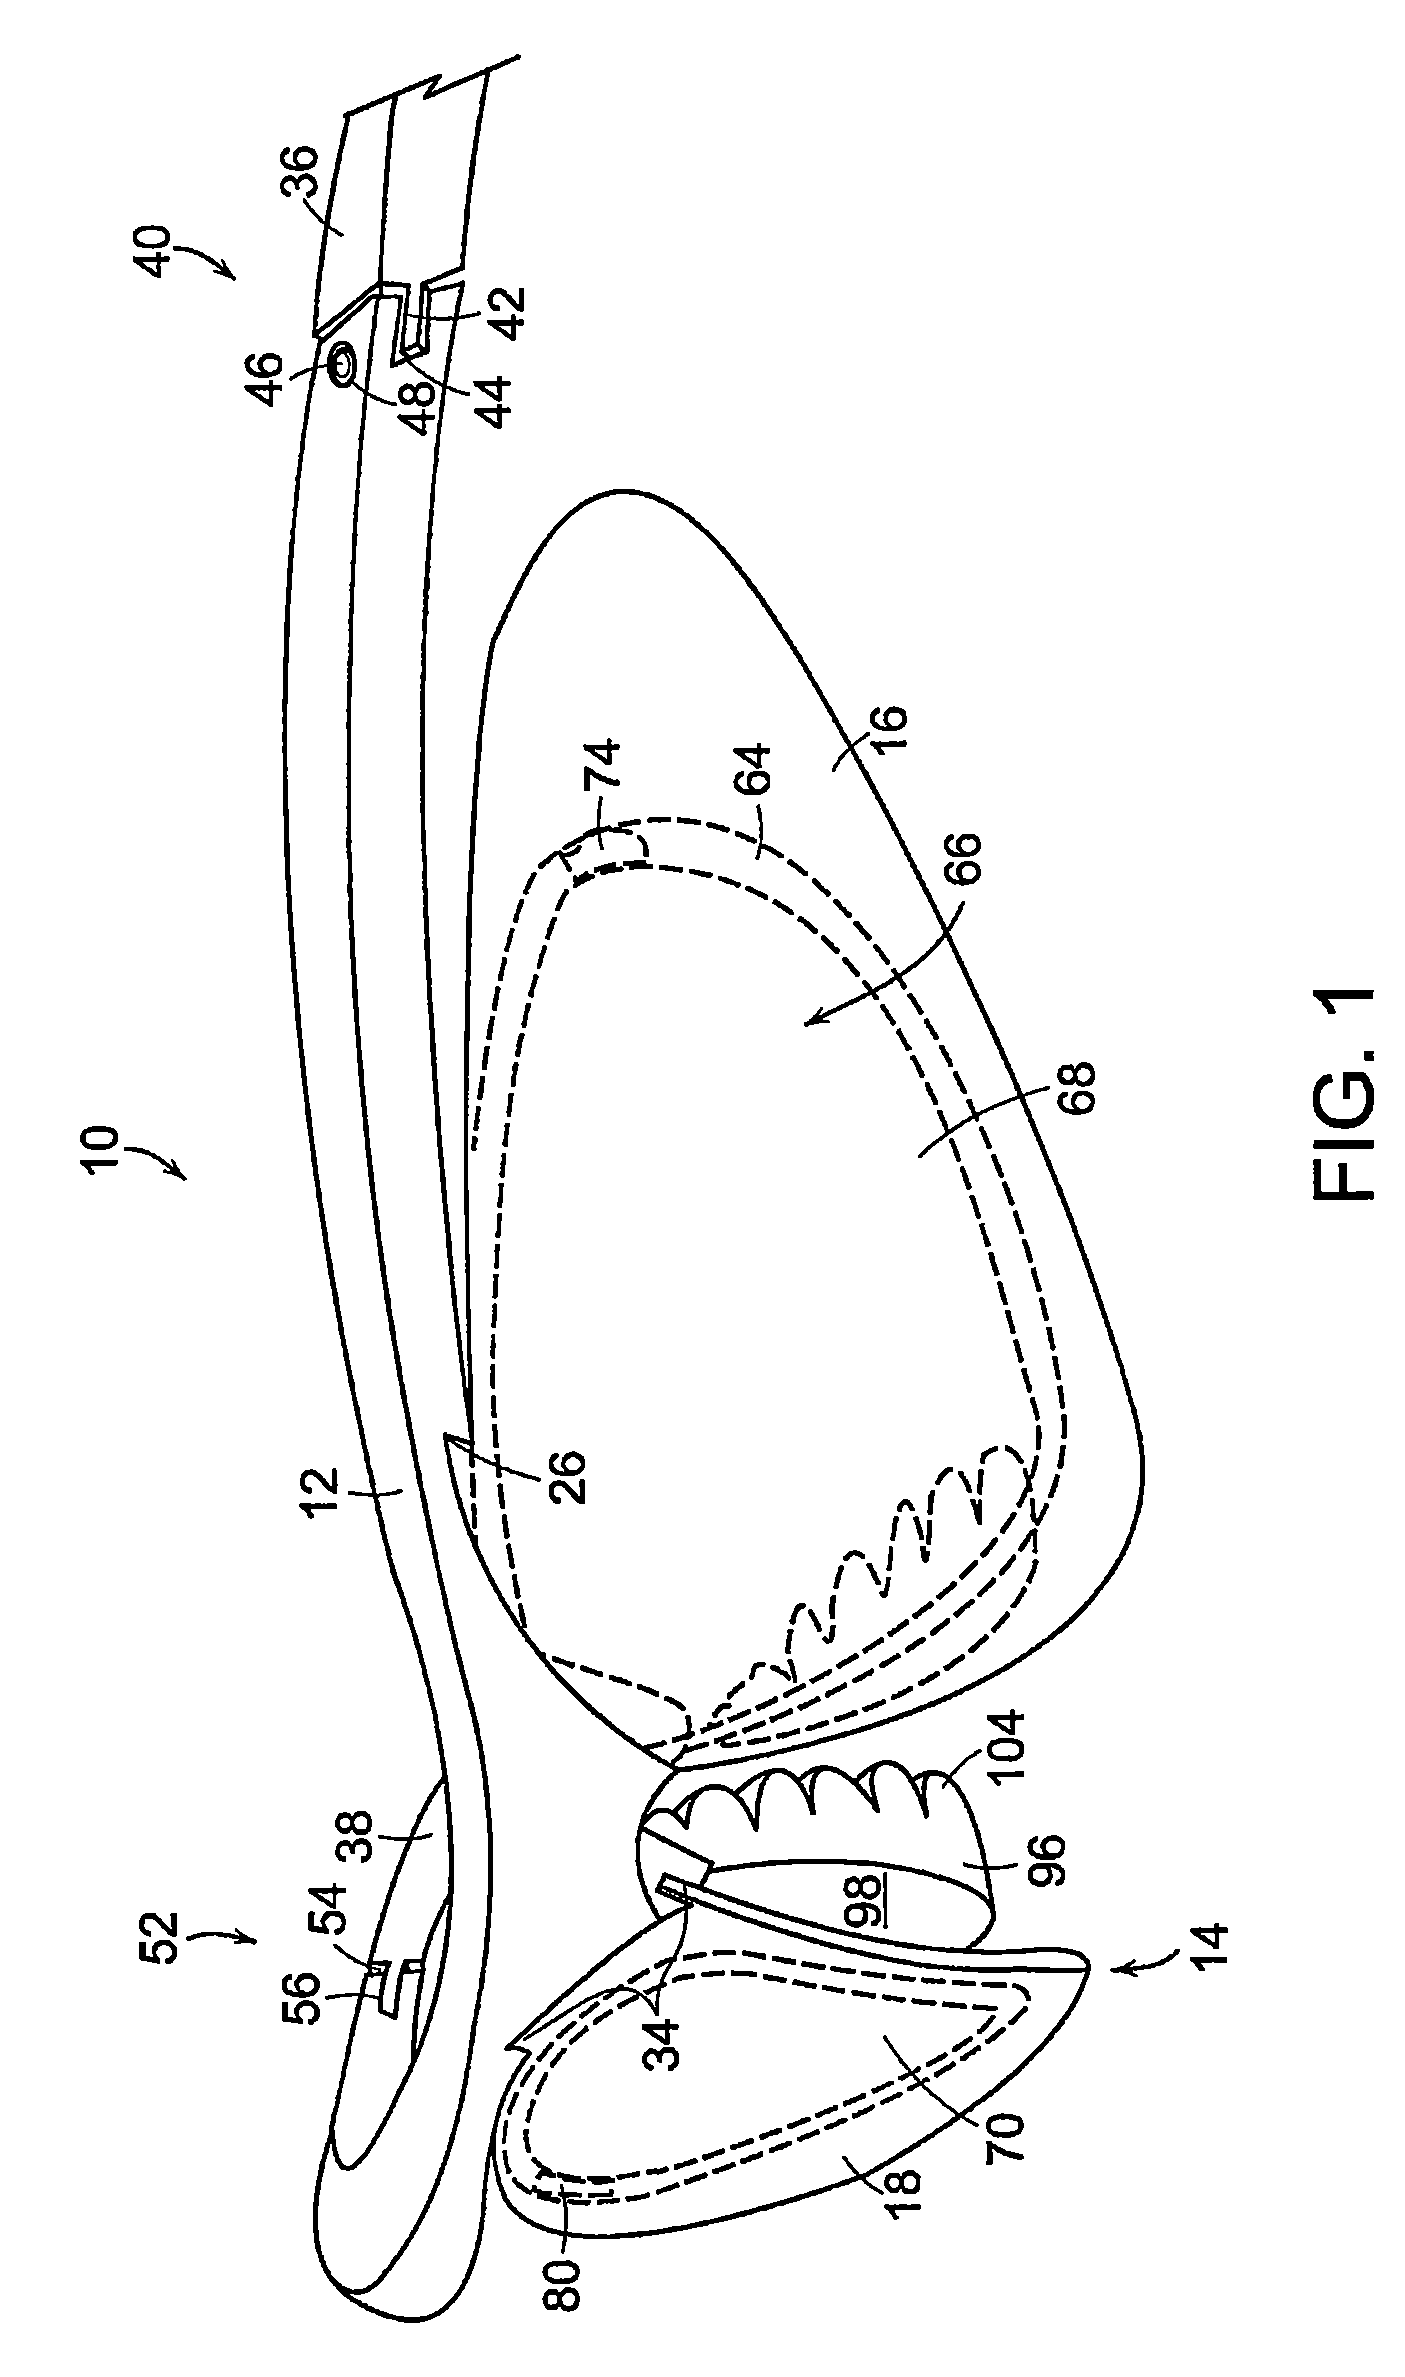 Eyewear with inner and outer frame lens